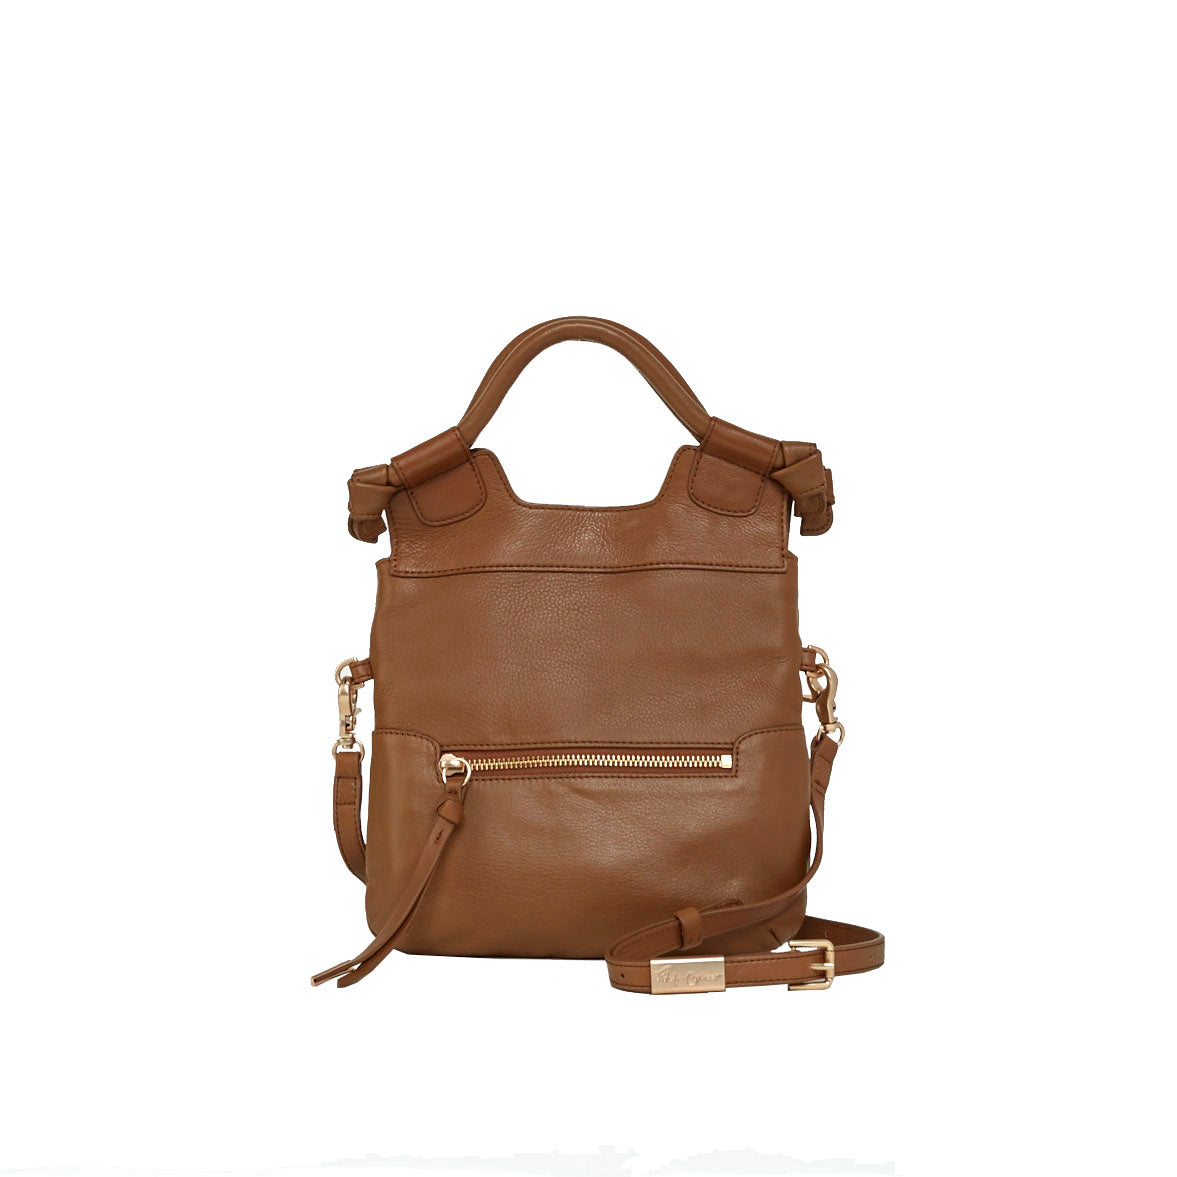 Replacement Crossbody Strap in Cognac (Small) - Foley + Corinna